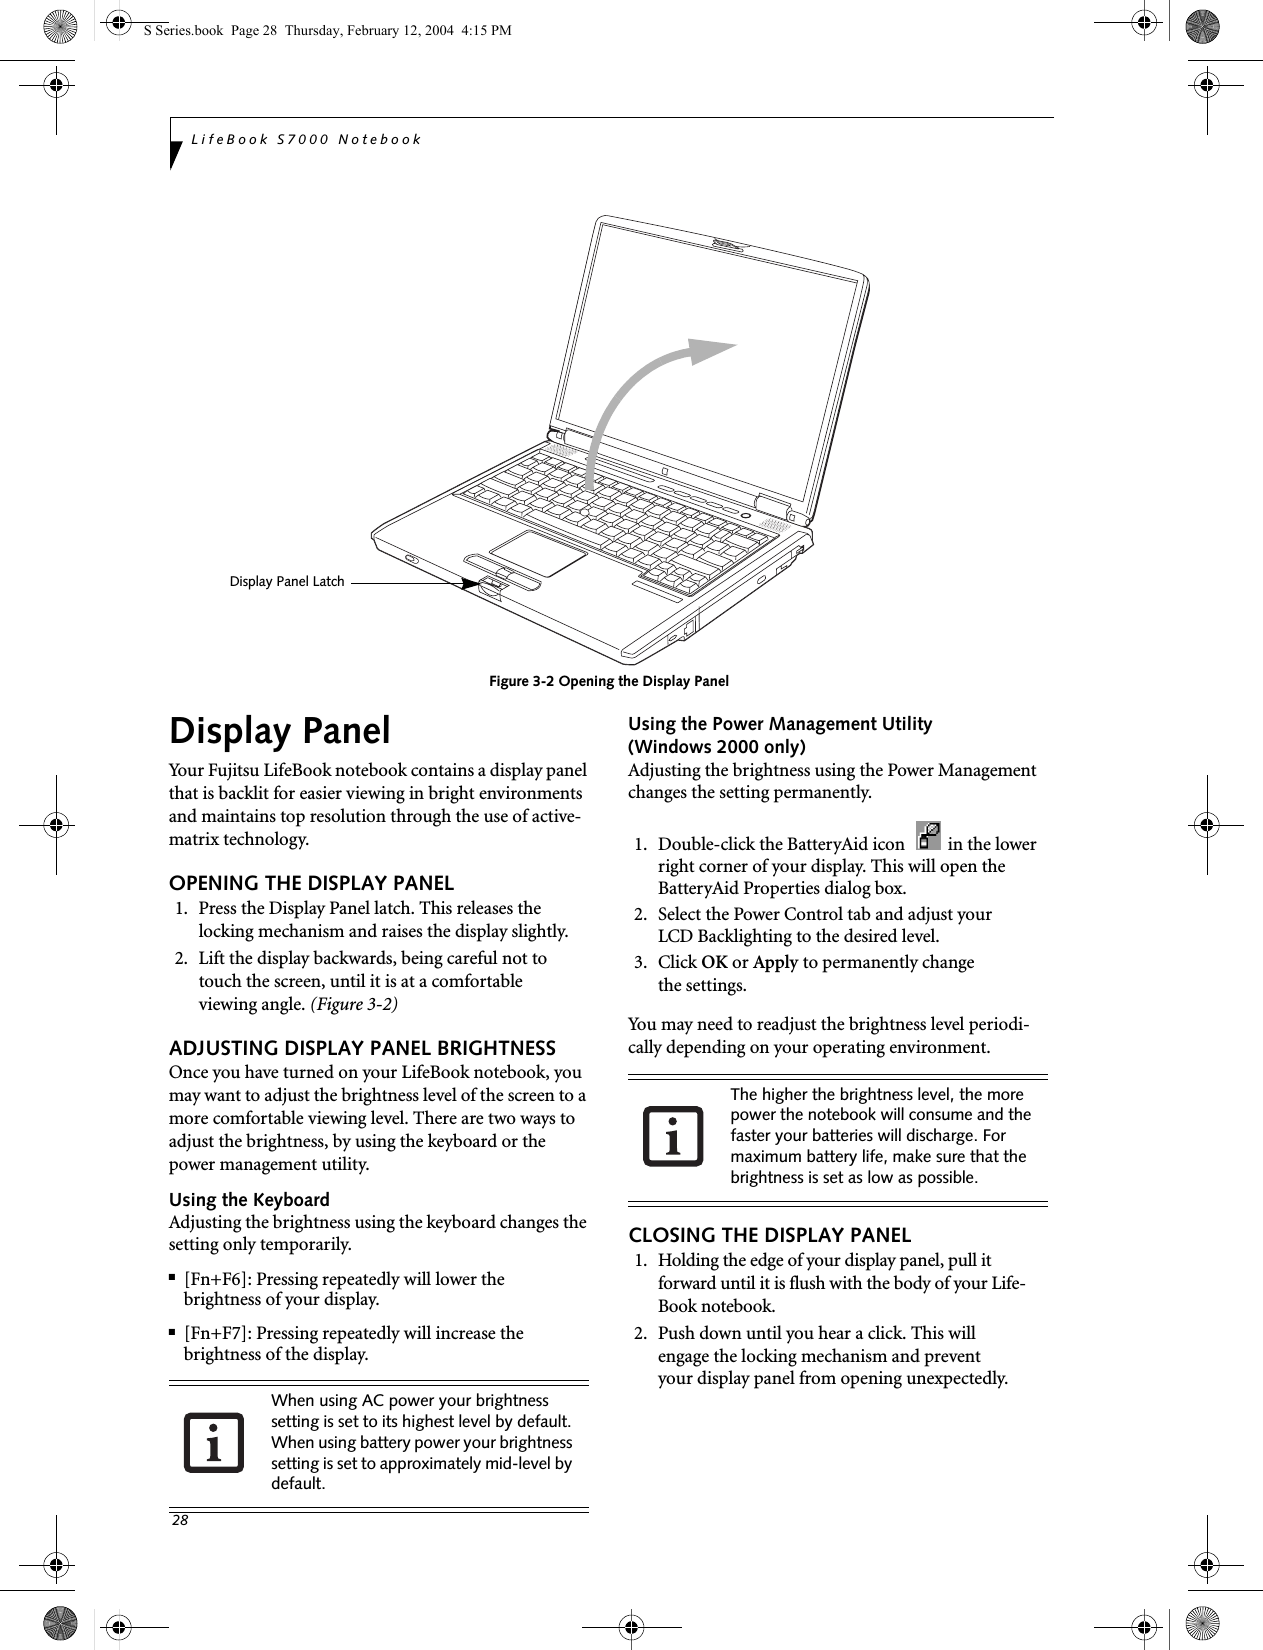 28LifeBook S7000 NotebookFigure 3-2 Opening the Display PanelDisplay PanelYour Fujitsu LifeBook notebook contains a display panel that is backlit for easier viewing in bright environments and maintains top resolution through the use of active-matrix technology. OPENING THE DISPLAY PANEL1. Press the Display Panel latch. This releases the locking mechanism and raises the display slightly.2. Lift the display backwards, being careful not to touch the screen, until it is at a comfortableviewing angle. (Figure 3-2)ADJUSTING DISPLAY PANEL BRIGHTNESSOnce you have turned on your LifeBook notebook, you may want to adjust the brightness level of the screen to a more comfortable viewing level. There are two ways to adjust the brightness, by using the keyboard or the power management utility. Using the KeyboardAdjusting the brightness using the keyboard changes the setting only temporarily. ■[Fn+F6]: Pressing repeatedly will lower thebrightness of your display.■[Fn+F7]: Pressing repeatedly will increase thebrightness of the display.Using the Power Management Utility (Windows 2000 only) Adjusting the brightness using the Power Management changes the setting permanently. 1. Double-click the BatteryAid icon    in the lower right corner of your display. This will open the BatteryAid Properties dialog box. 2. Select the Power Control tab and adjust yourLCD Backlighting to the desired level.3. Click OK or Apply to permanently changethe settings.You may need to readjust the brightness level periodi-cally depending on your operating environment. CLOSING THE DISPLAY PANEL1. Holding the edge of your display panel, pull it forward until it is flush with the body of your Life-Book notebook. 2. Push down until you hear a click. This willengage the locking mechanism and preventyour display panel from opening unexpectedly.Display Panel LatchWhen using AC power your brightness setting is set to its highest level by default. When using battery power your brightness setting is set to approximately mid-level by default.The higher the brightness level, the more power the notebook will consume and the faster your batteries will discharge. For maximum battery life, make sure that the brightness is set as low as possible.S Series.book  Page 28  Thursday, February 12, 2004  4:15 PM